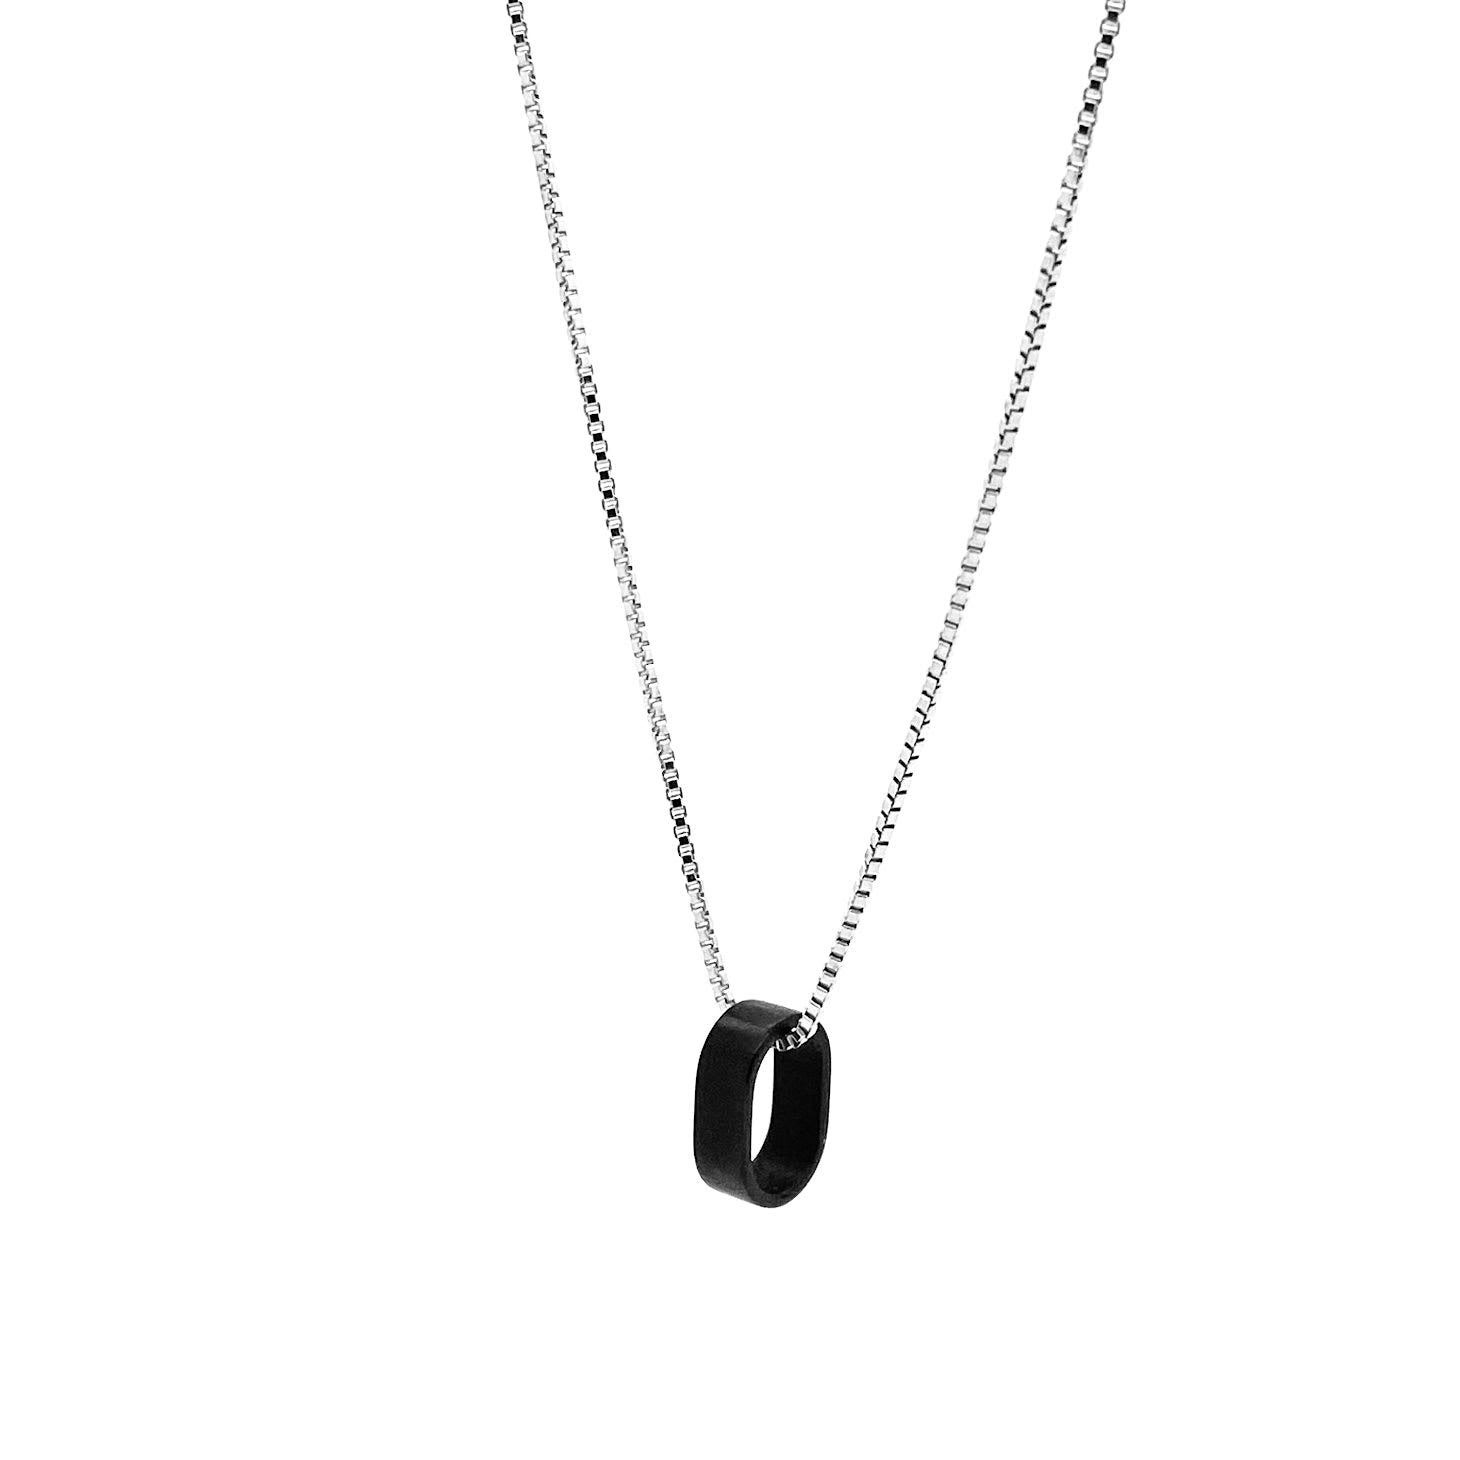 This meticulously designed, with a geometrical flavor, brushed black ceramic pendant necklace is perfect worn alone or paired with a WristBend stacking bracelet. Made by WristBend